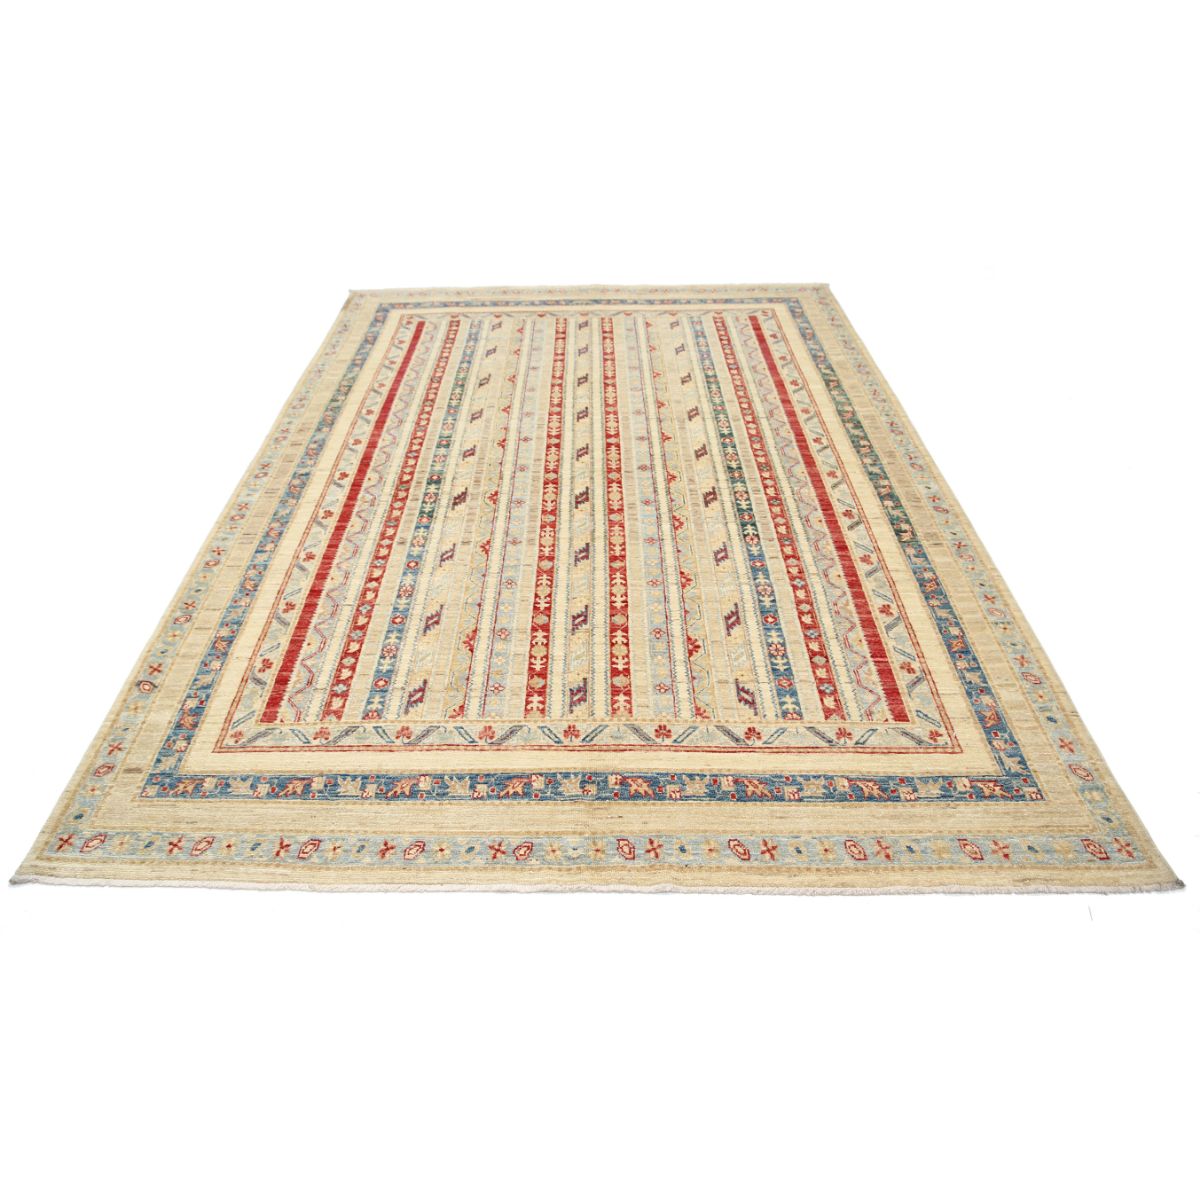 Shaal 6'9" X 9'6" Wool Hand-Knotted Rug